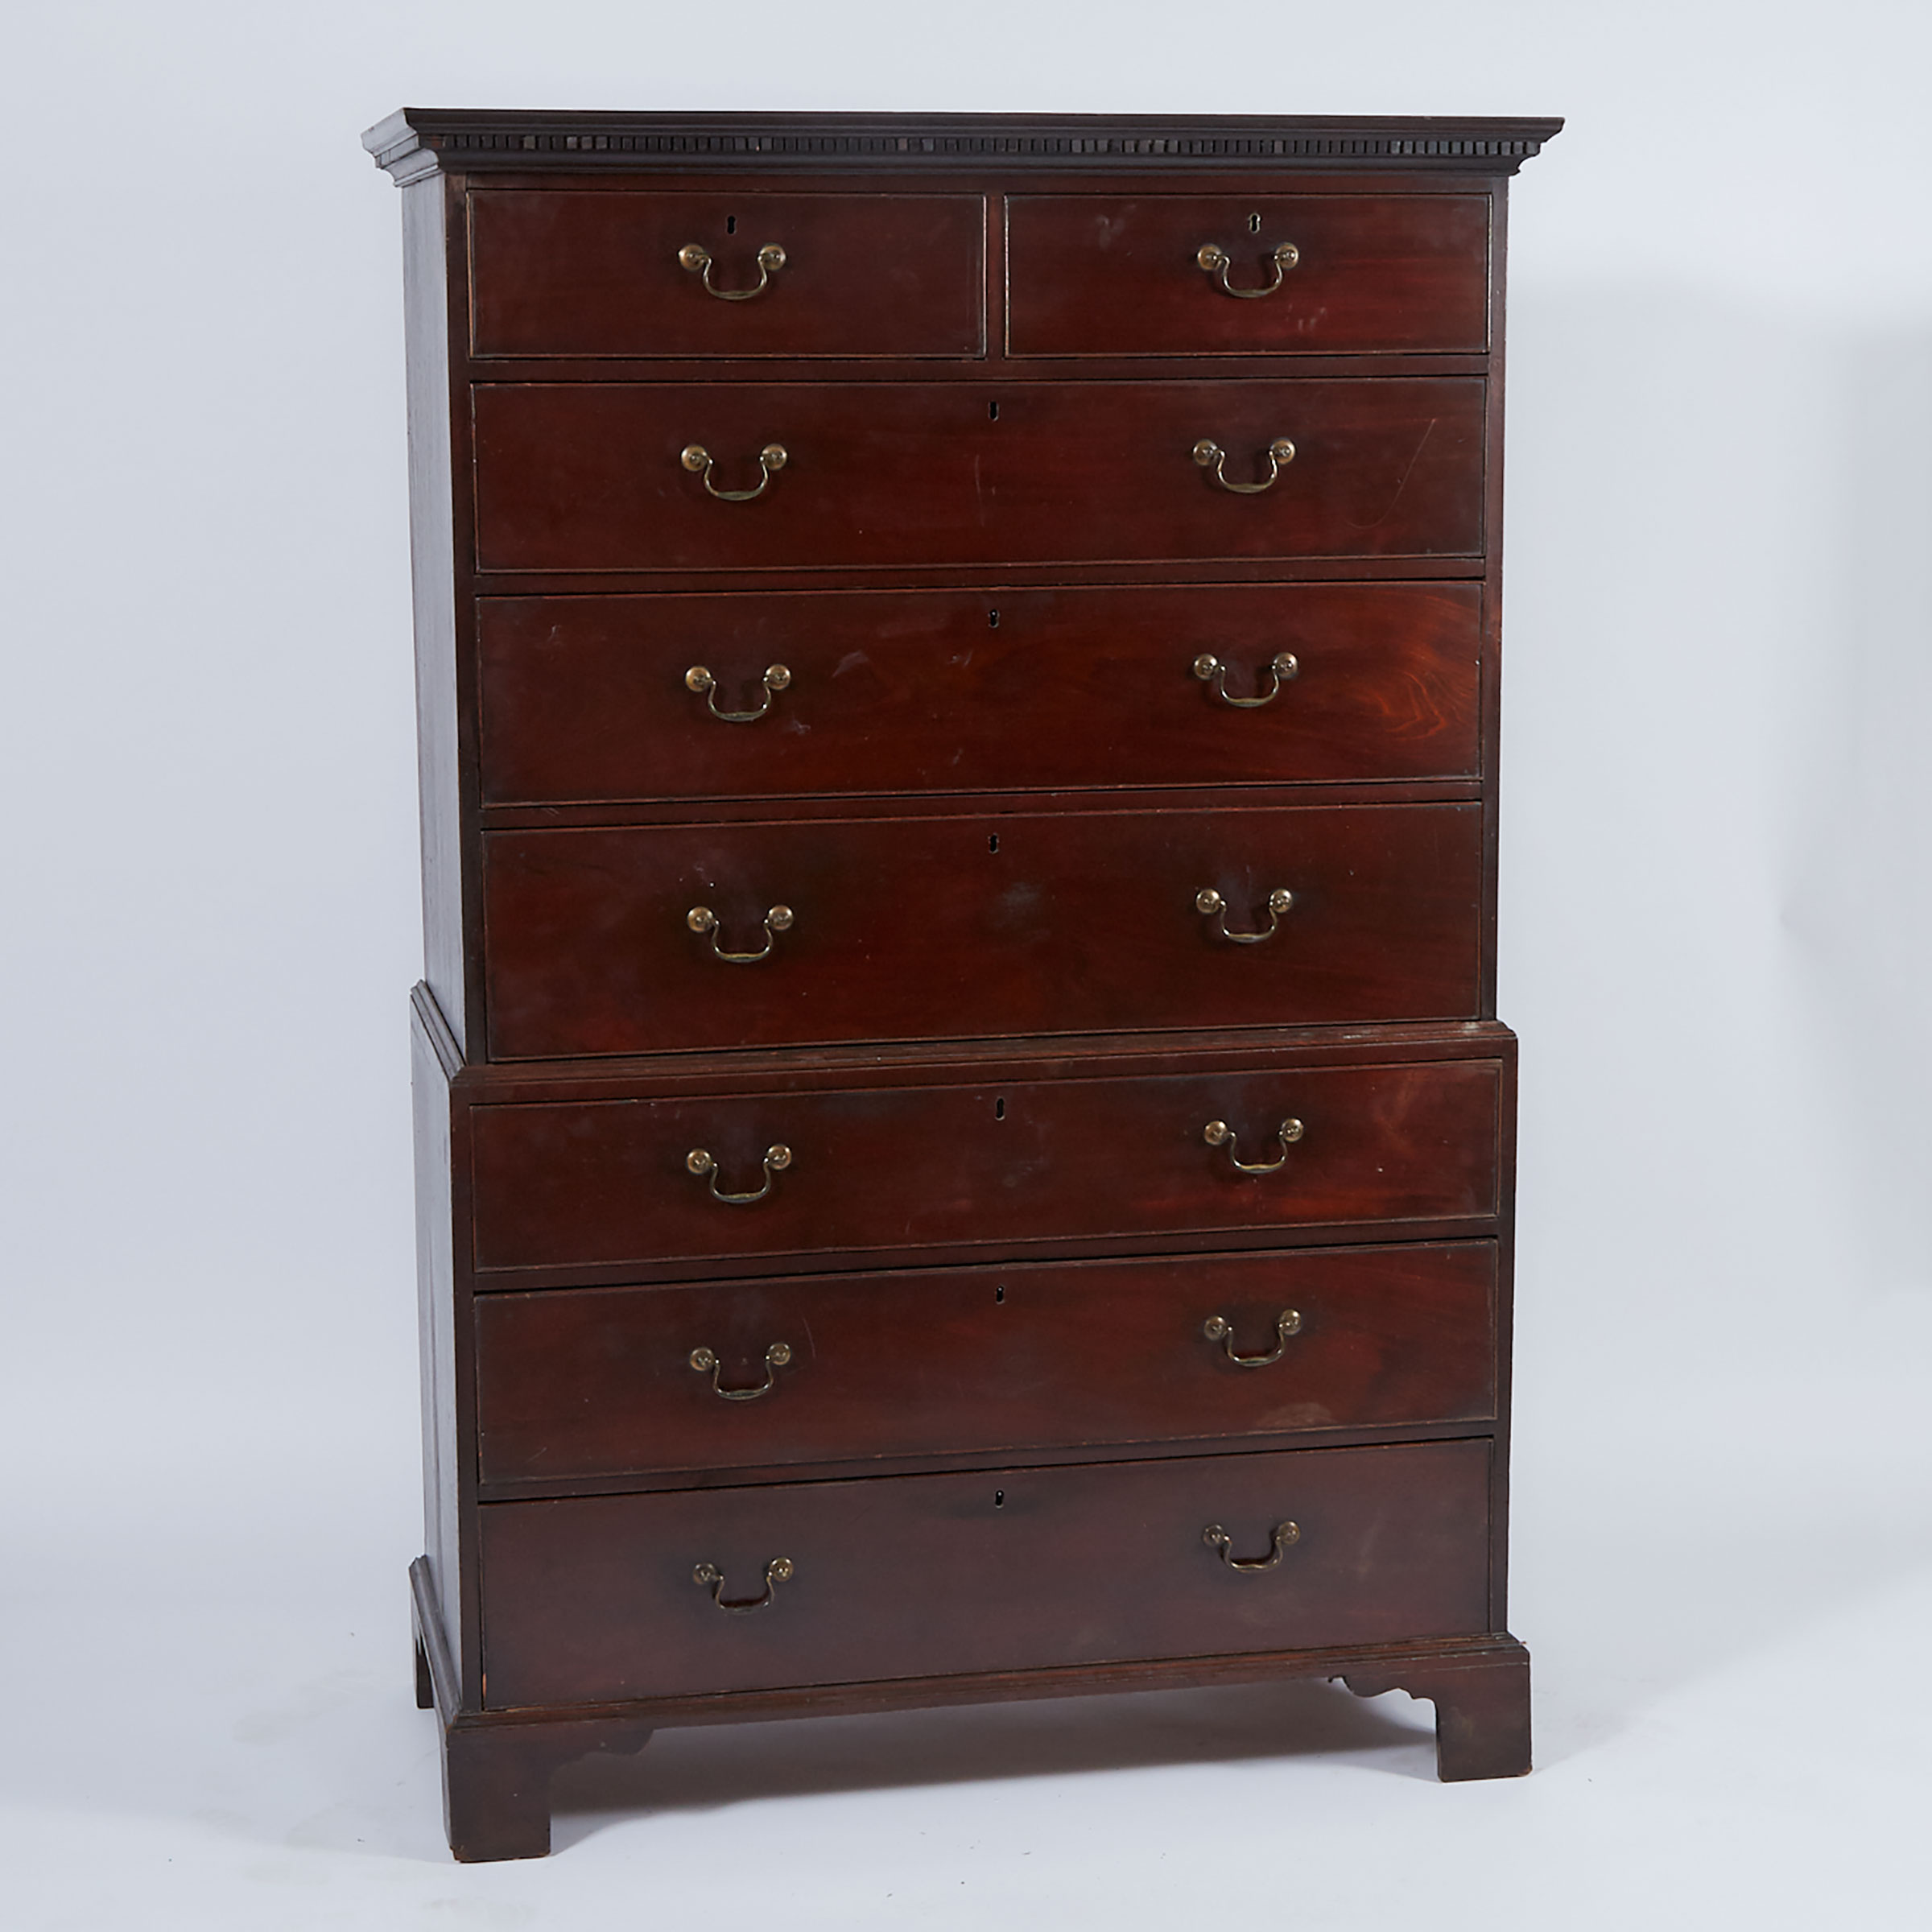 English Oak Chest-on-Chest, late 18th/early 19th century